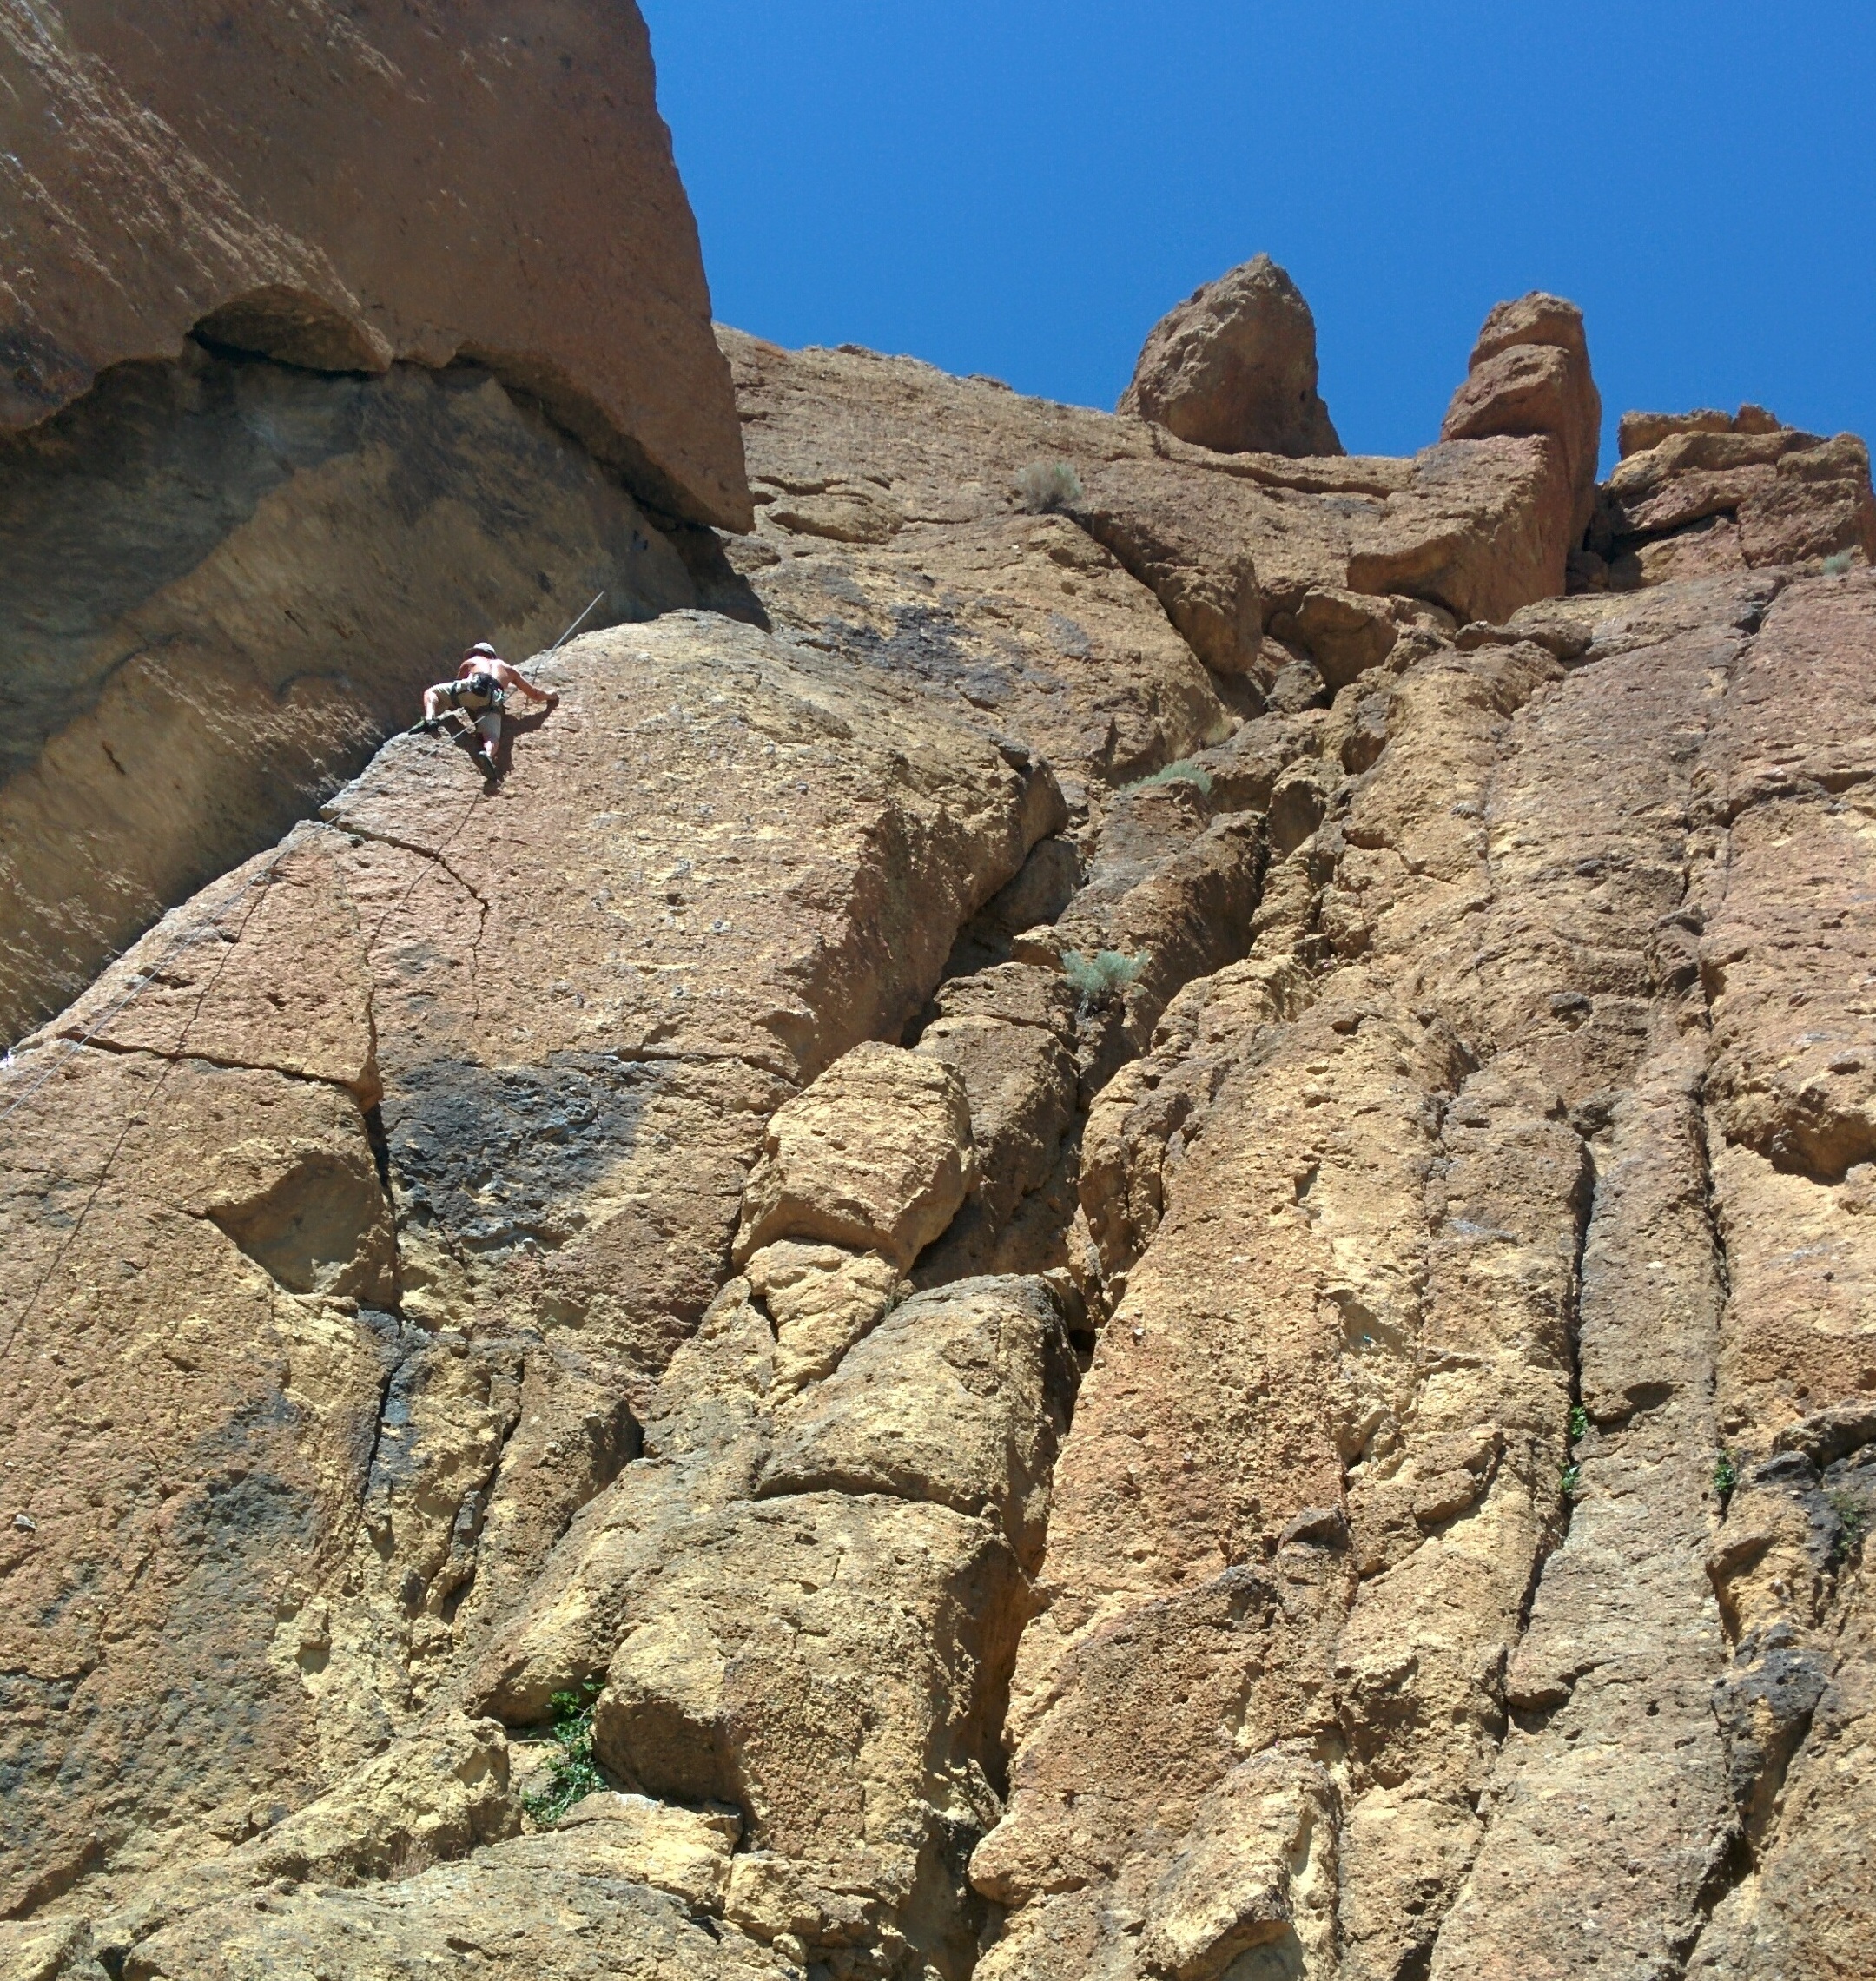 Me climbing at Smith Rock State Park in Oregon